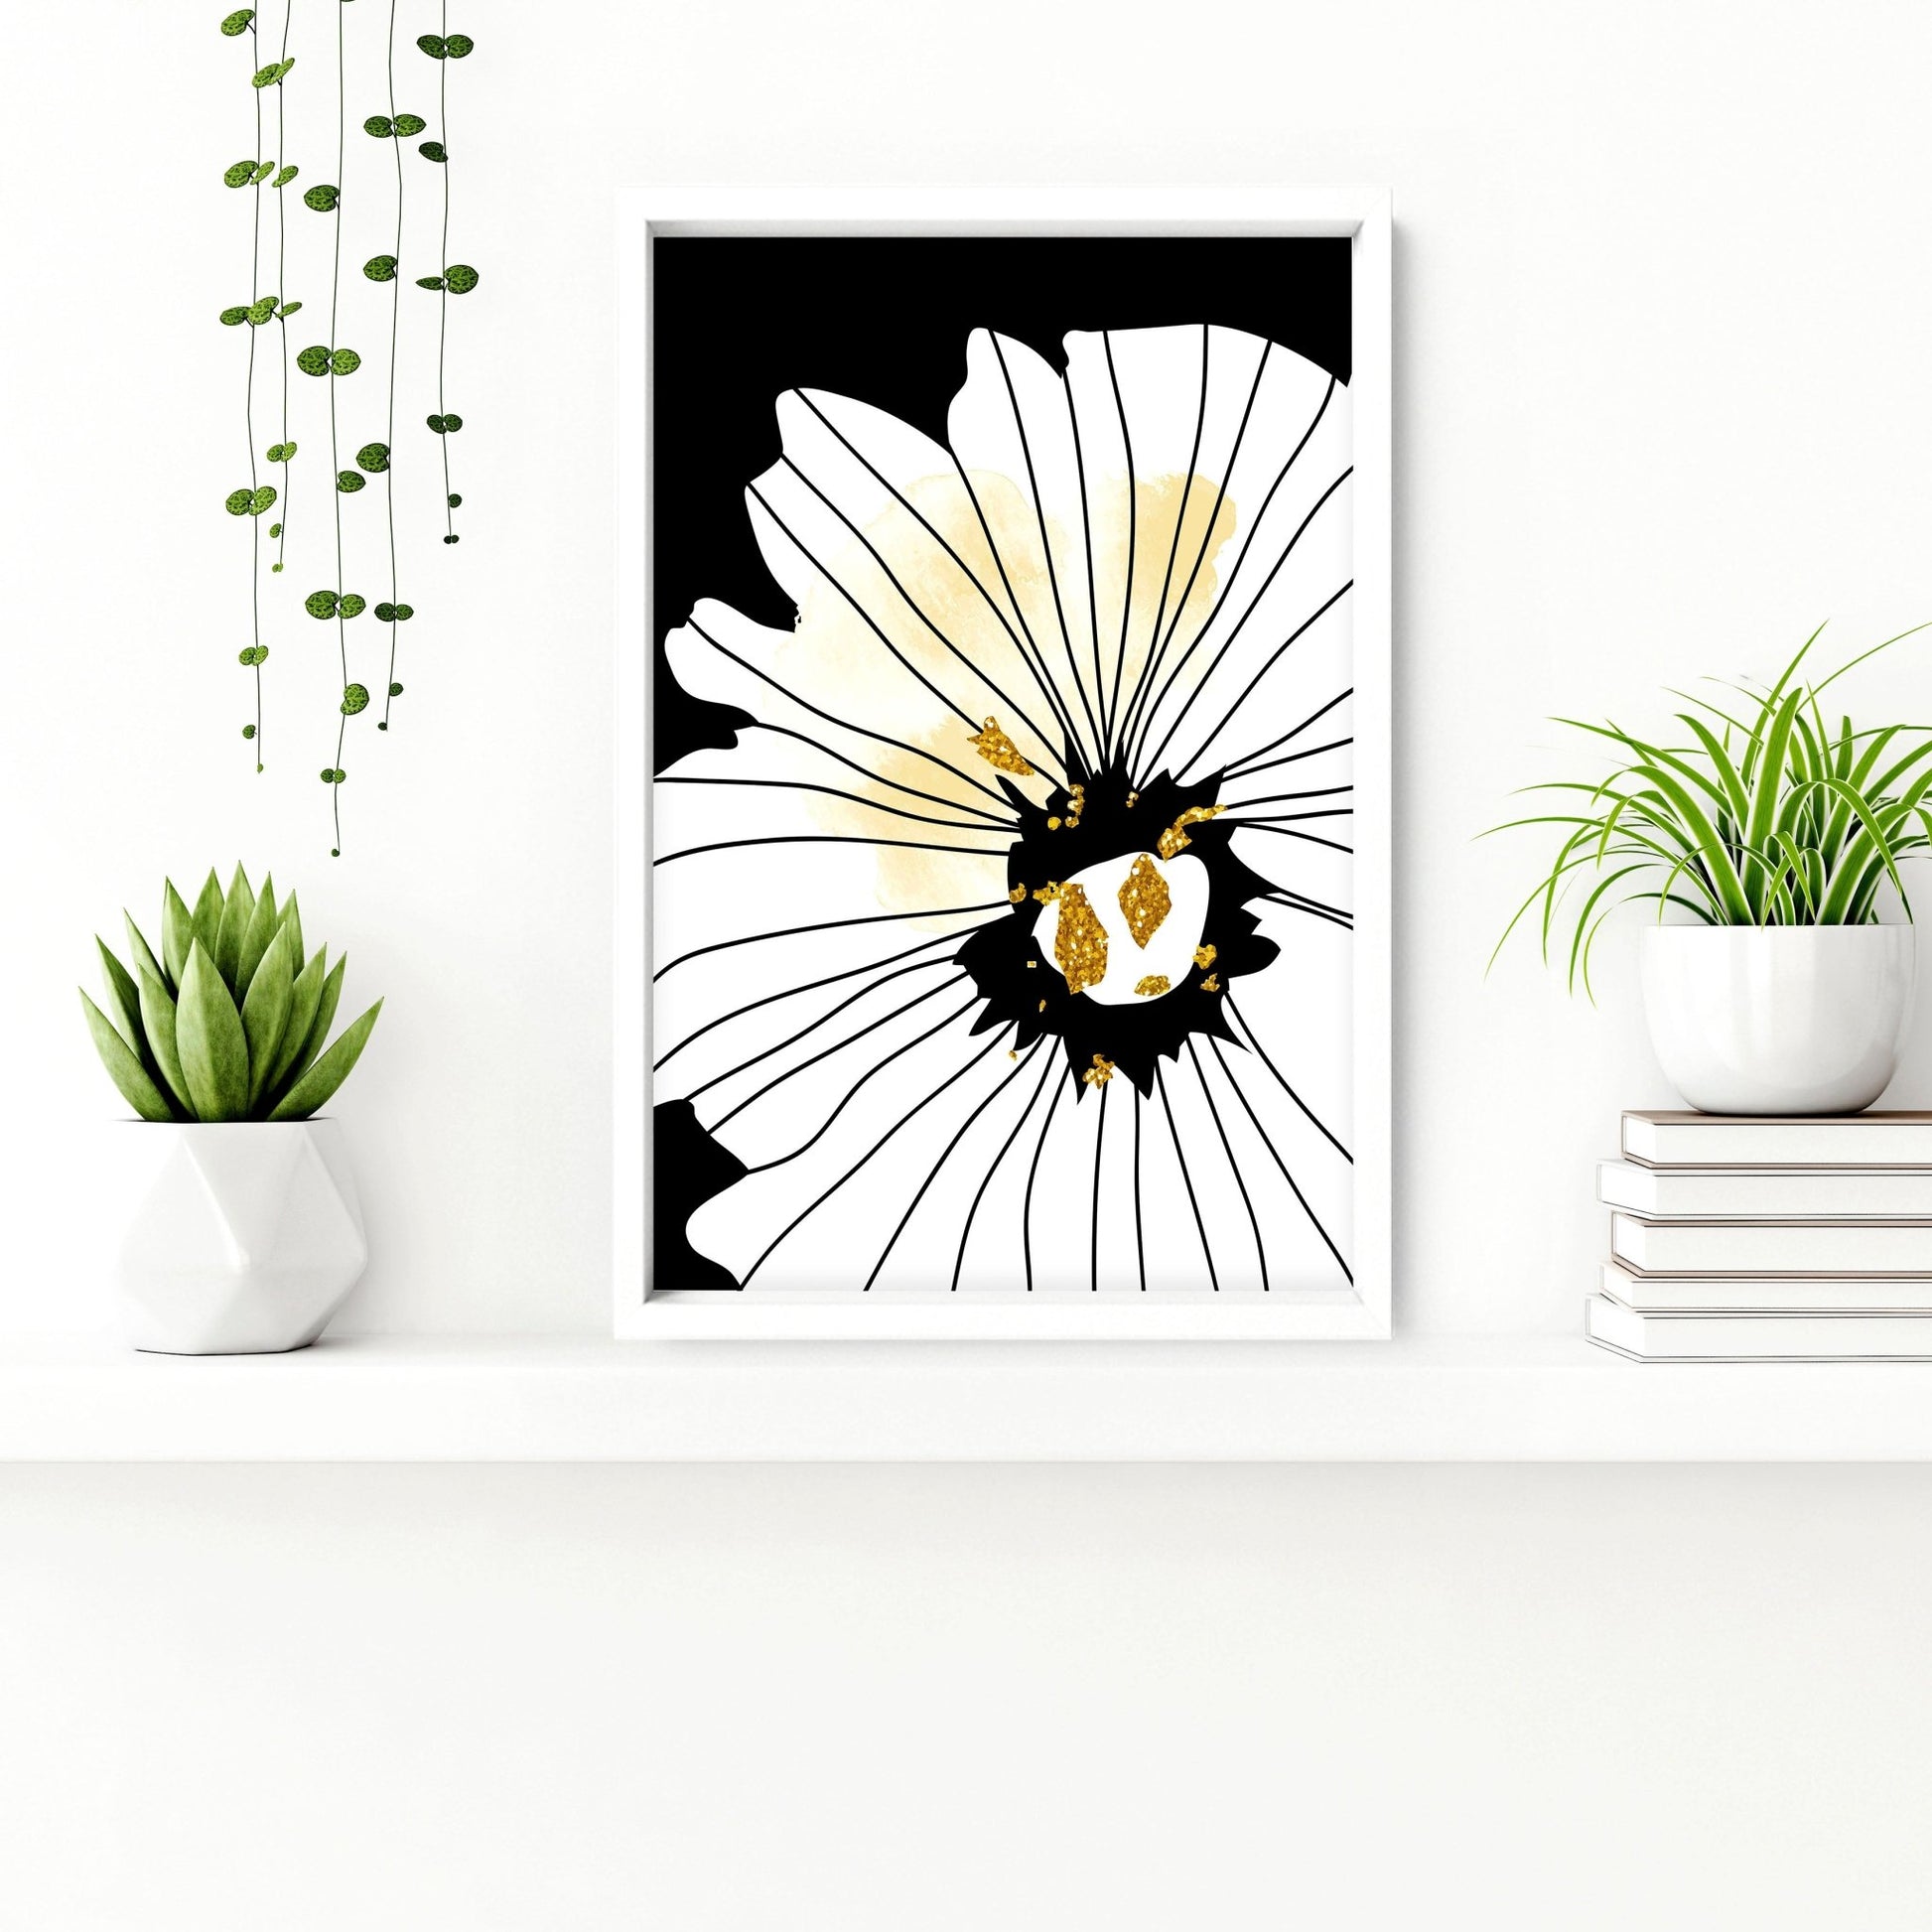 Black & Gold prints for the bathroom | set of 3 wall art - About Wall Art